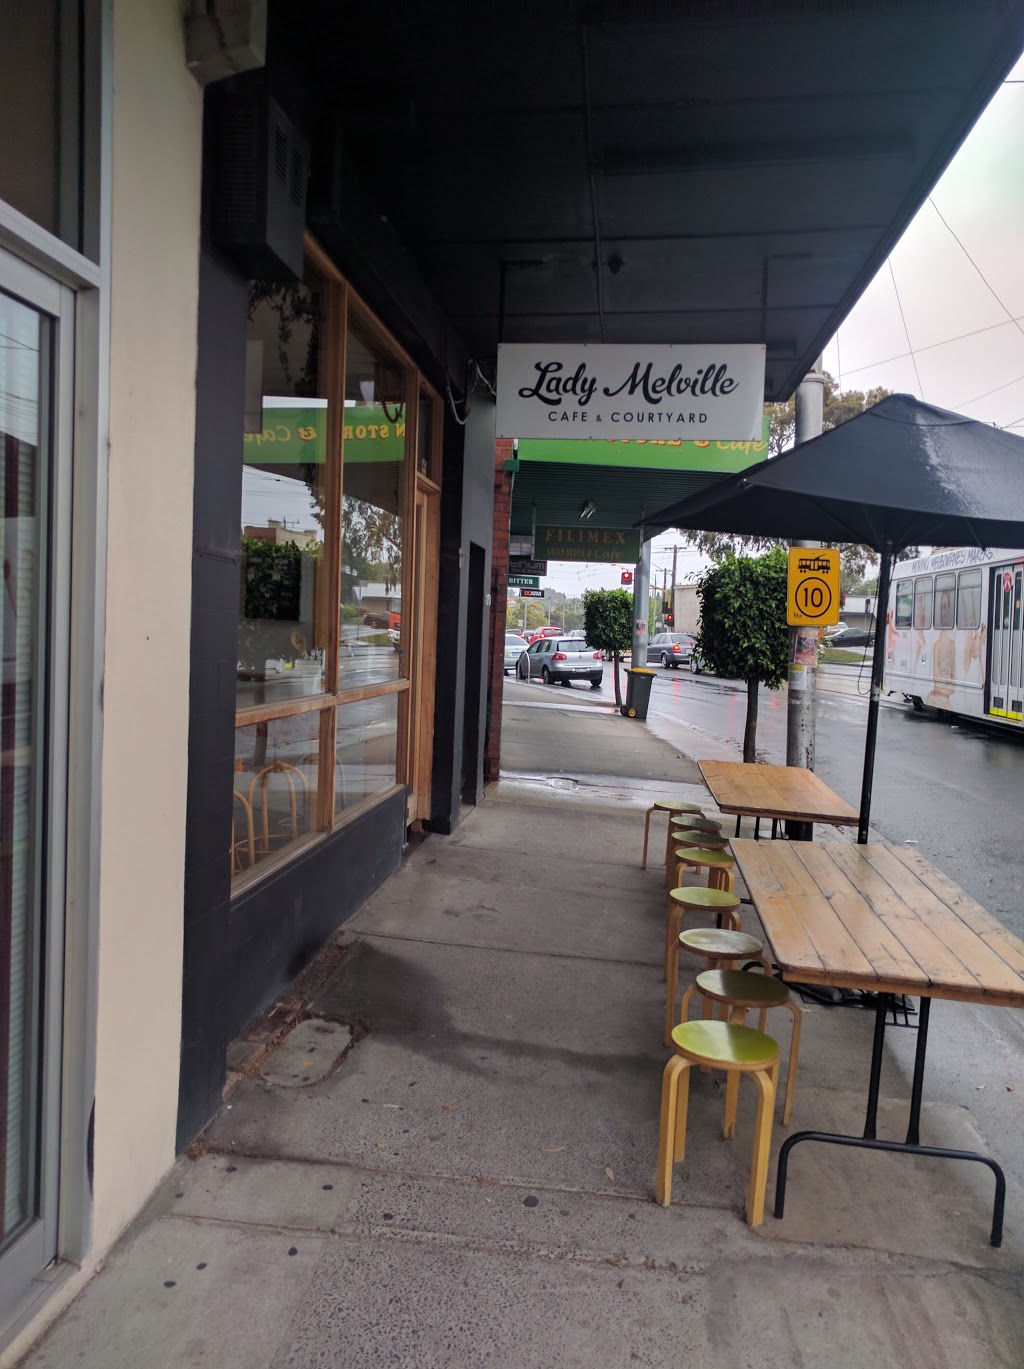 Lady Melville Cafe & Courtyard | cafe | 227 Melville Rd, Brunswick West VIC 3055, Australia | 0451528848 OR +61 451 528 848